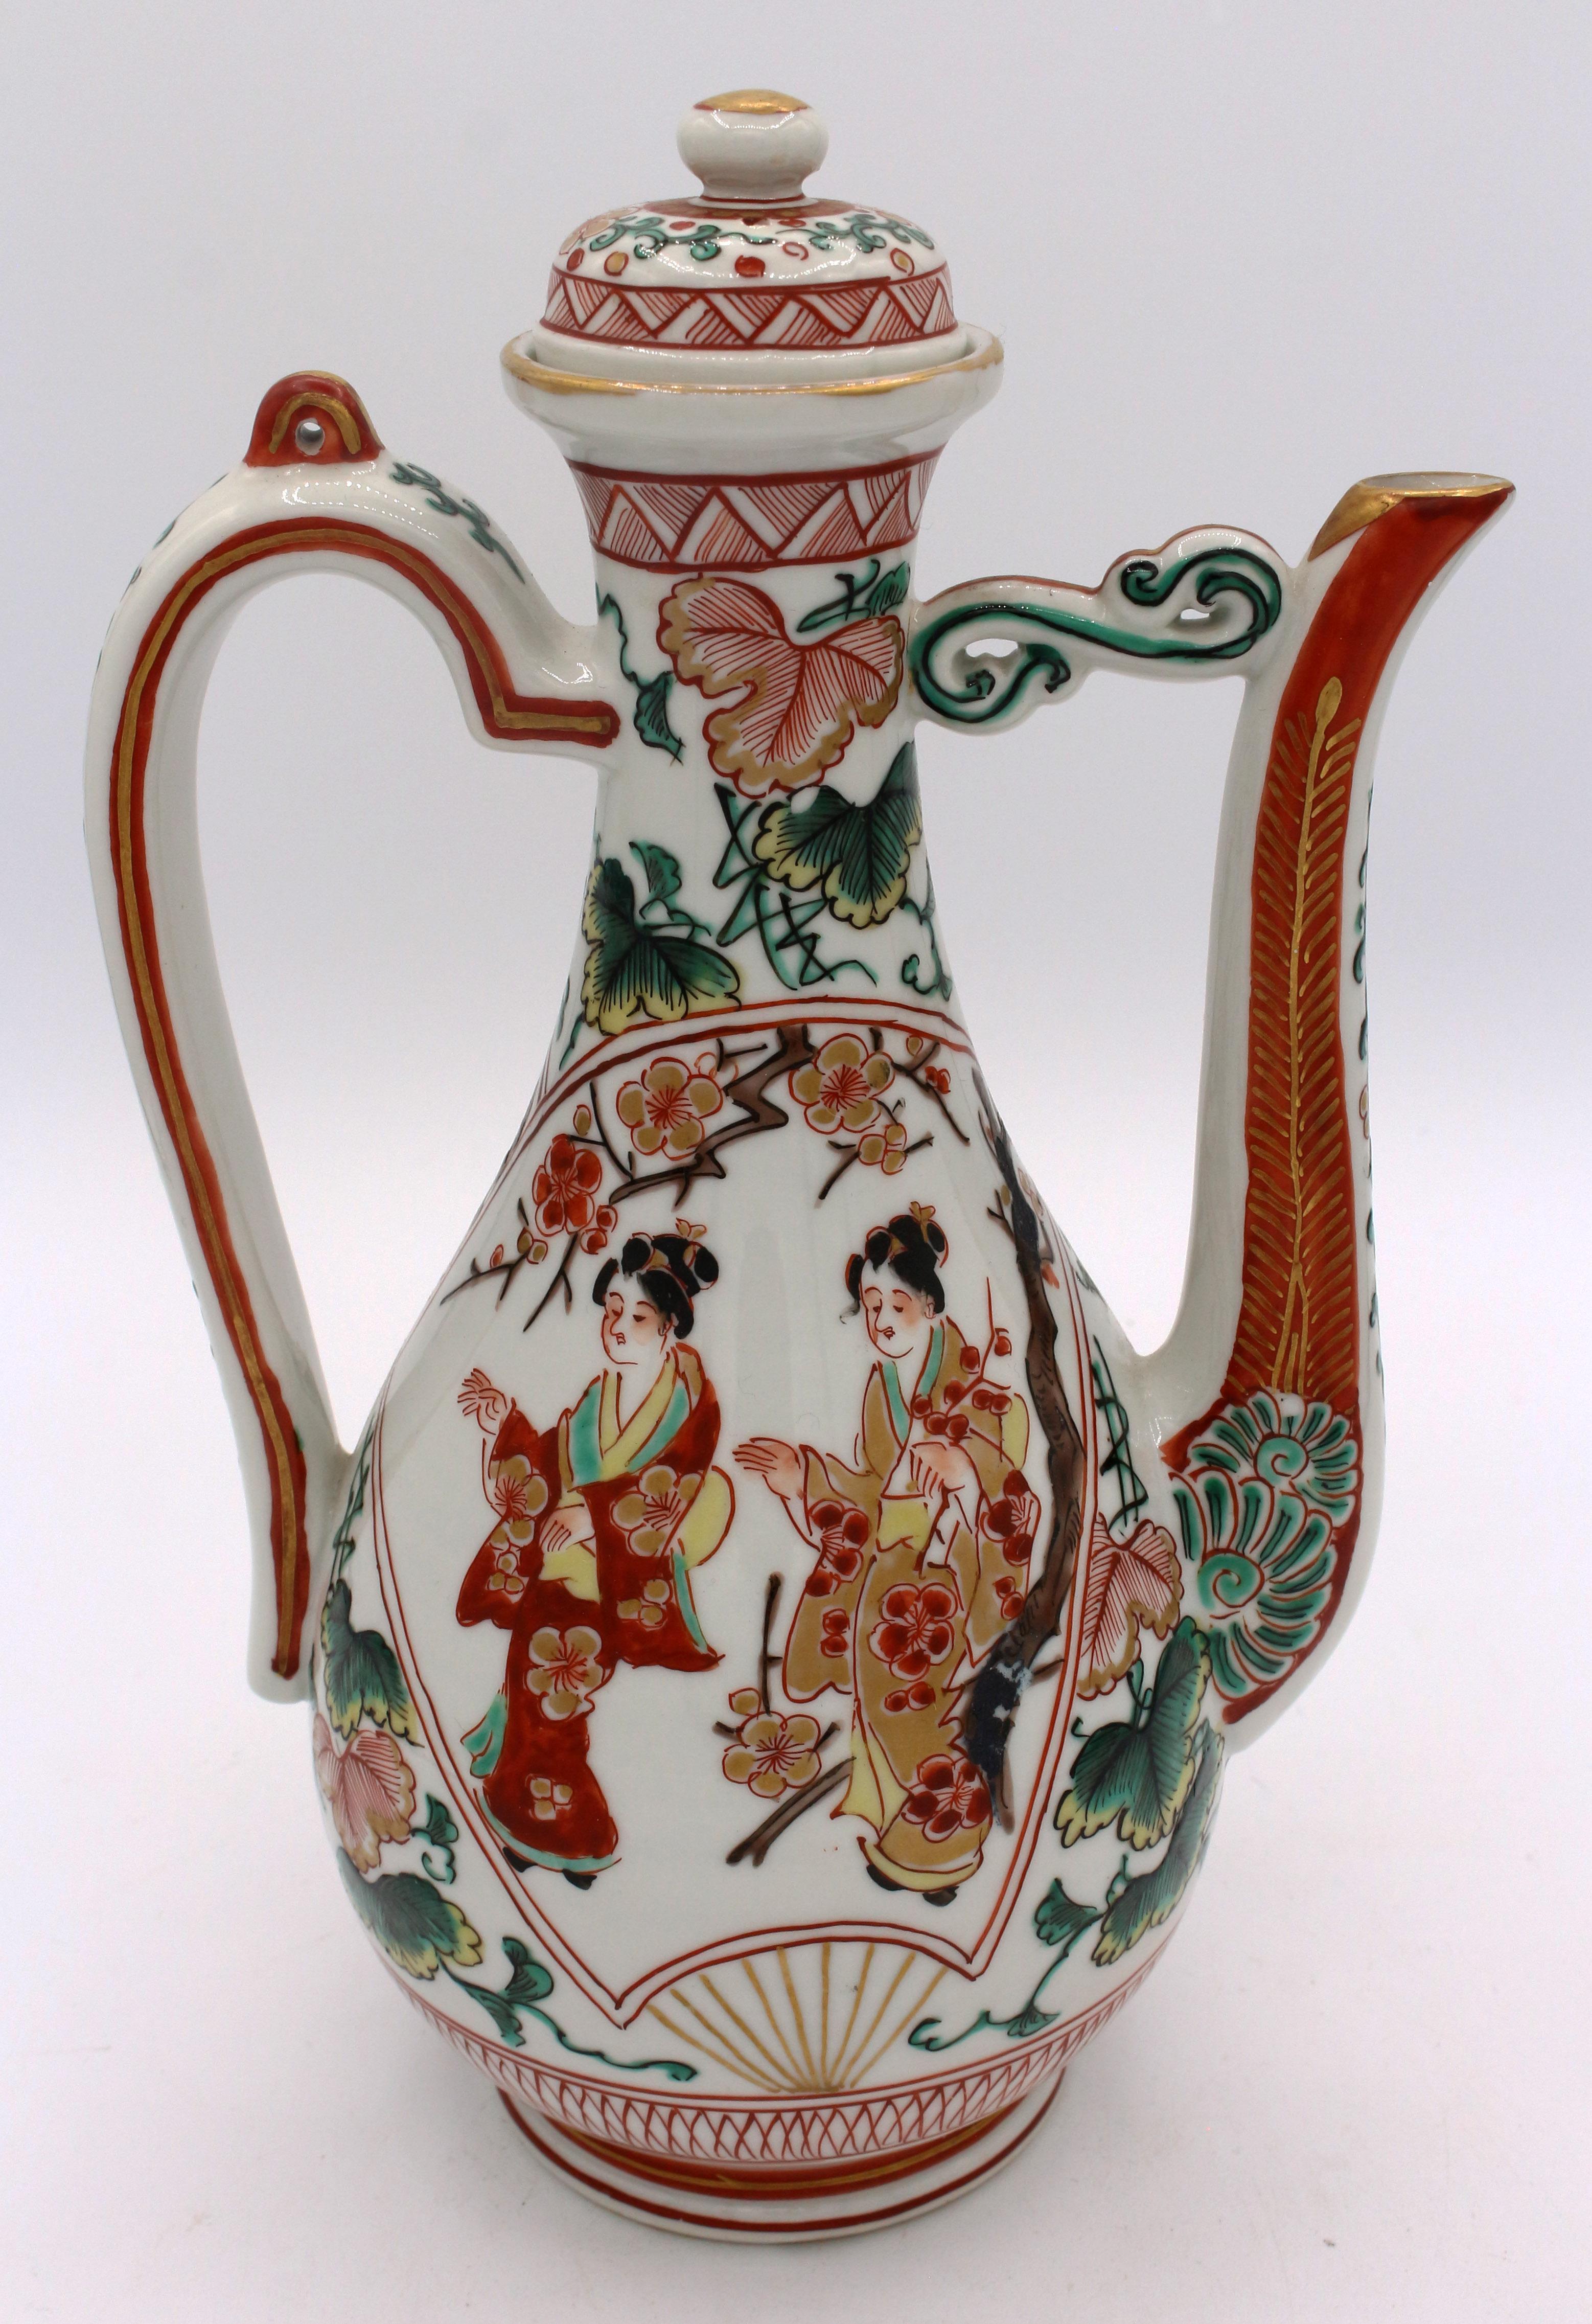 A Japanese, Meiji period, porcelain wine ewer. Fans set off the figural reserves. This is the finest & earliest of the 